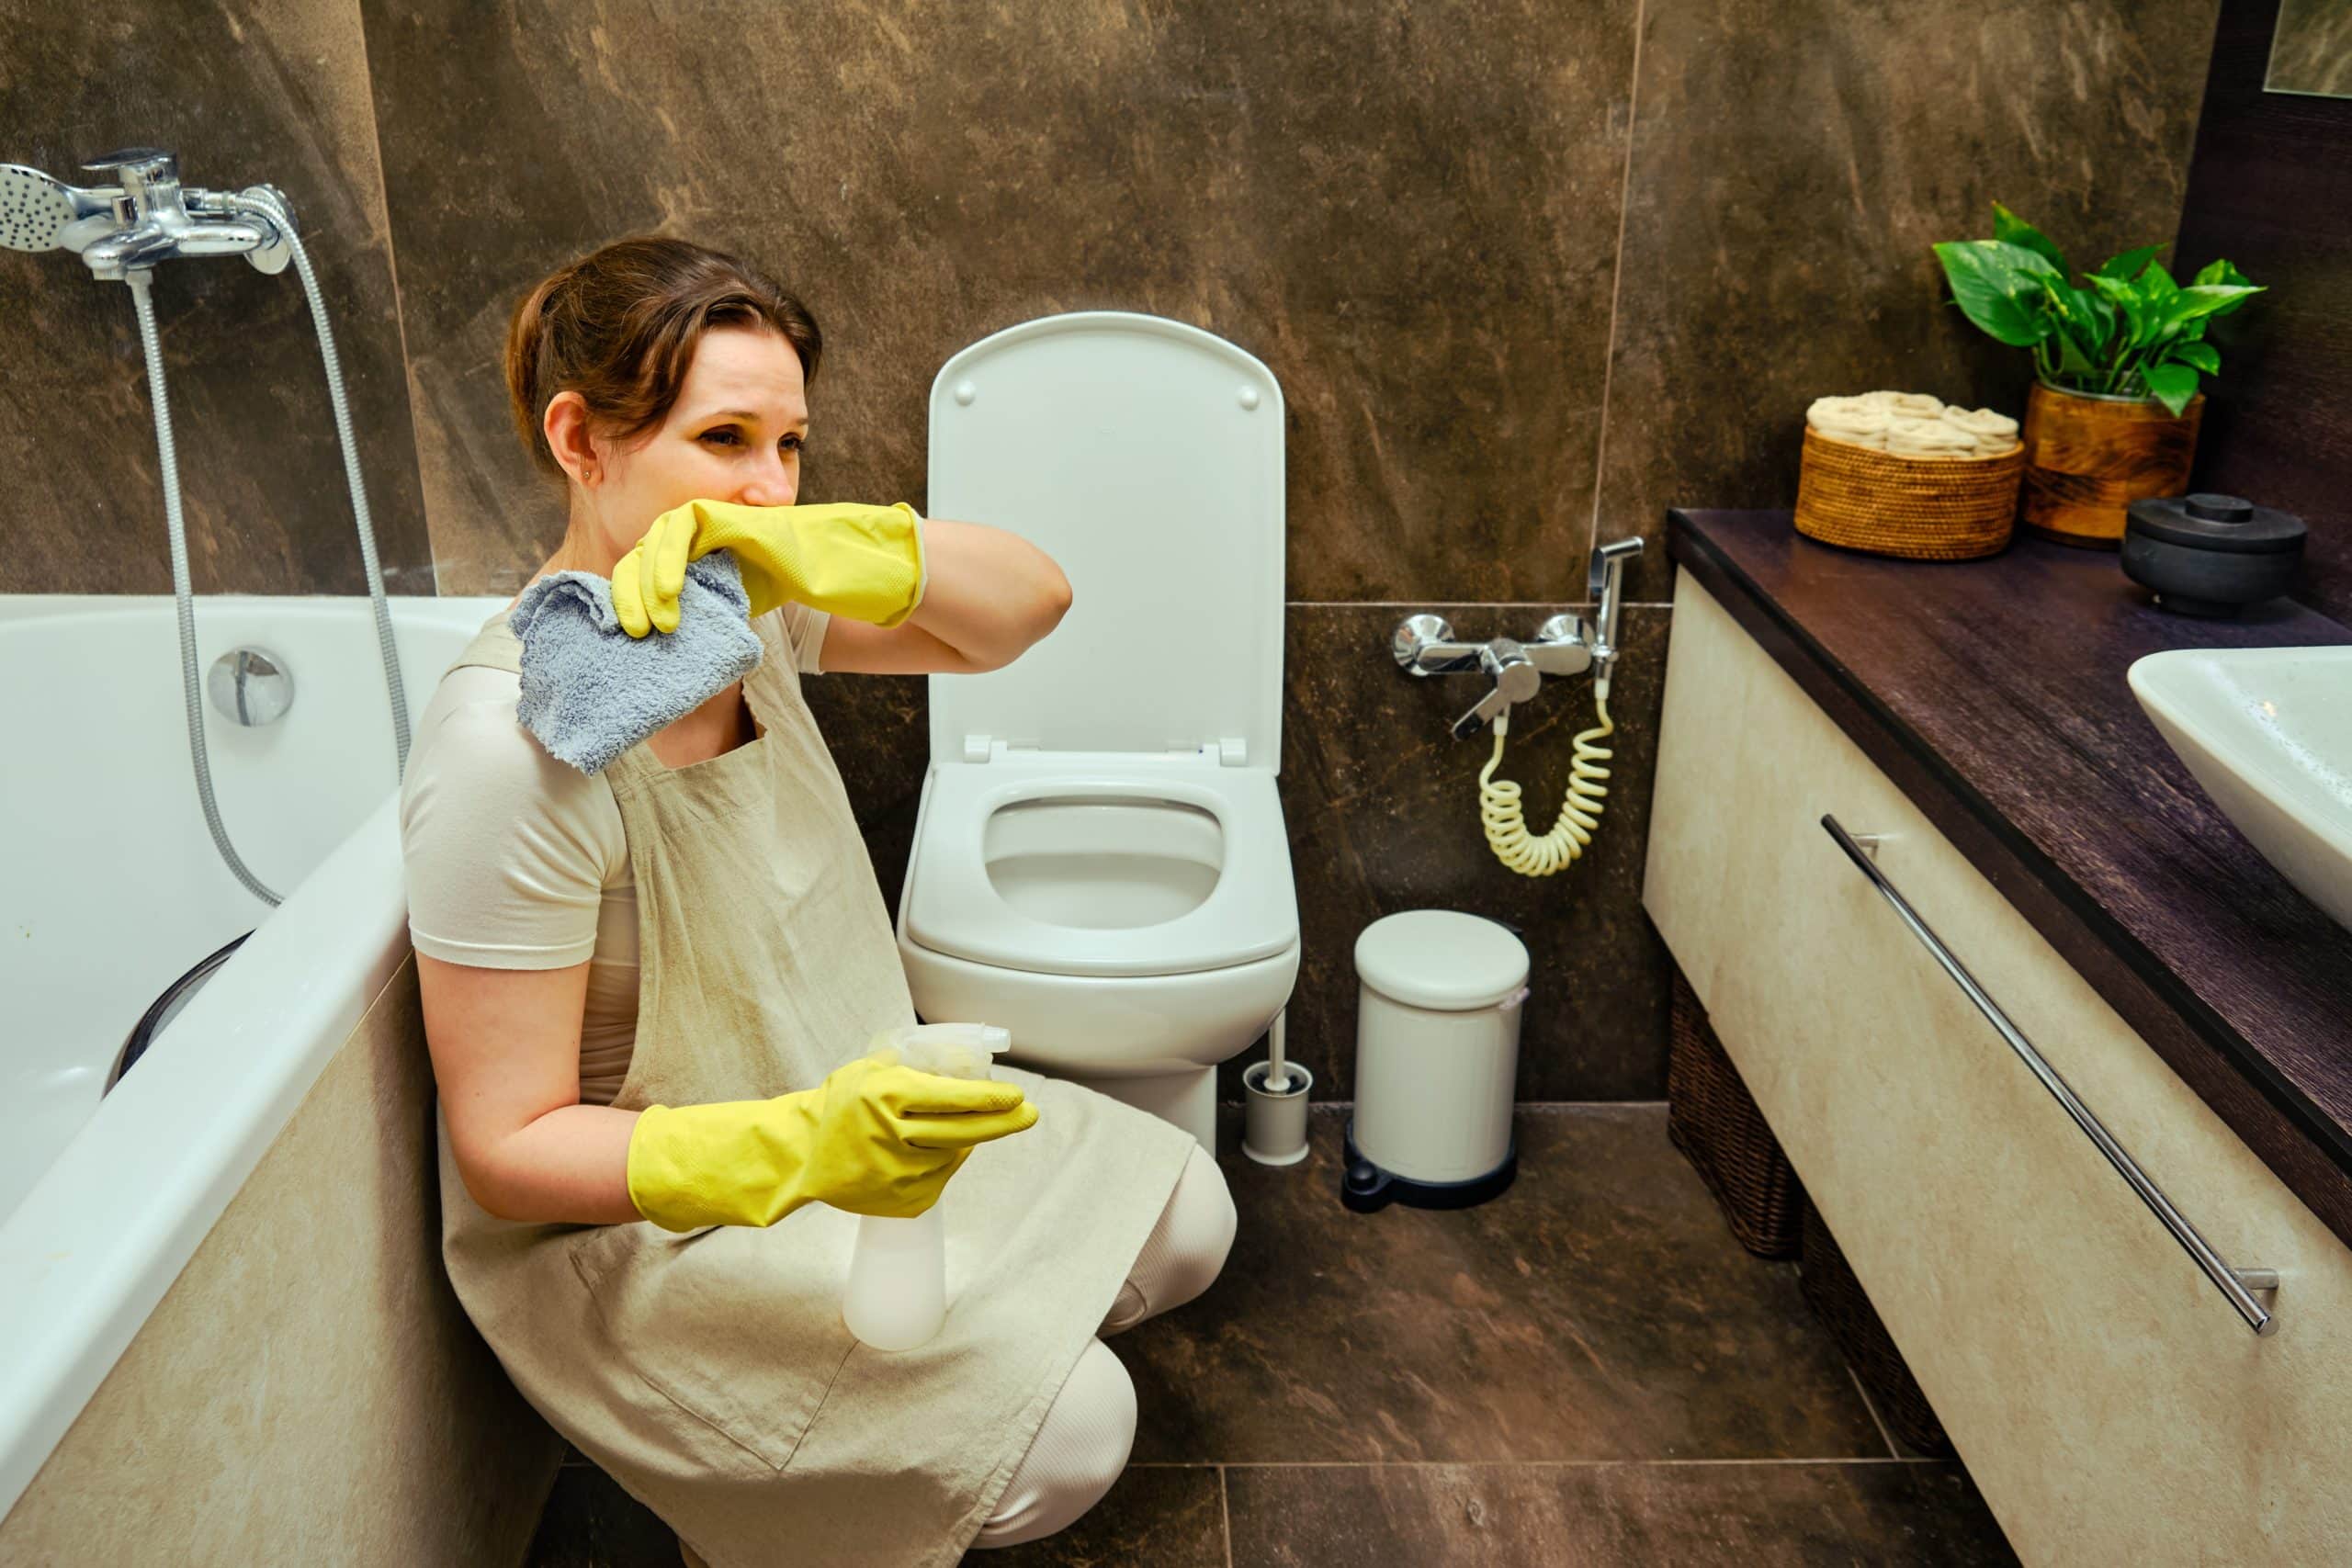 A woman cleans the home bathroom with a sense of disgust at the toilet bowl. Unpleasant odors and aversion to dirt while cleaning.